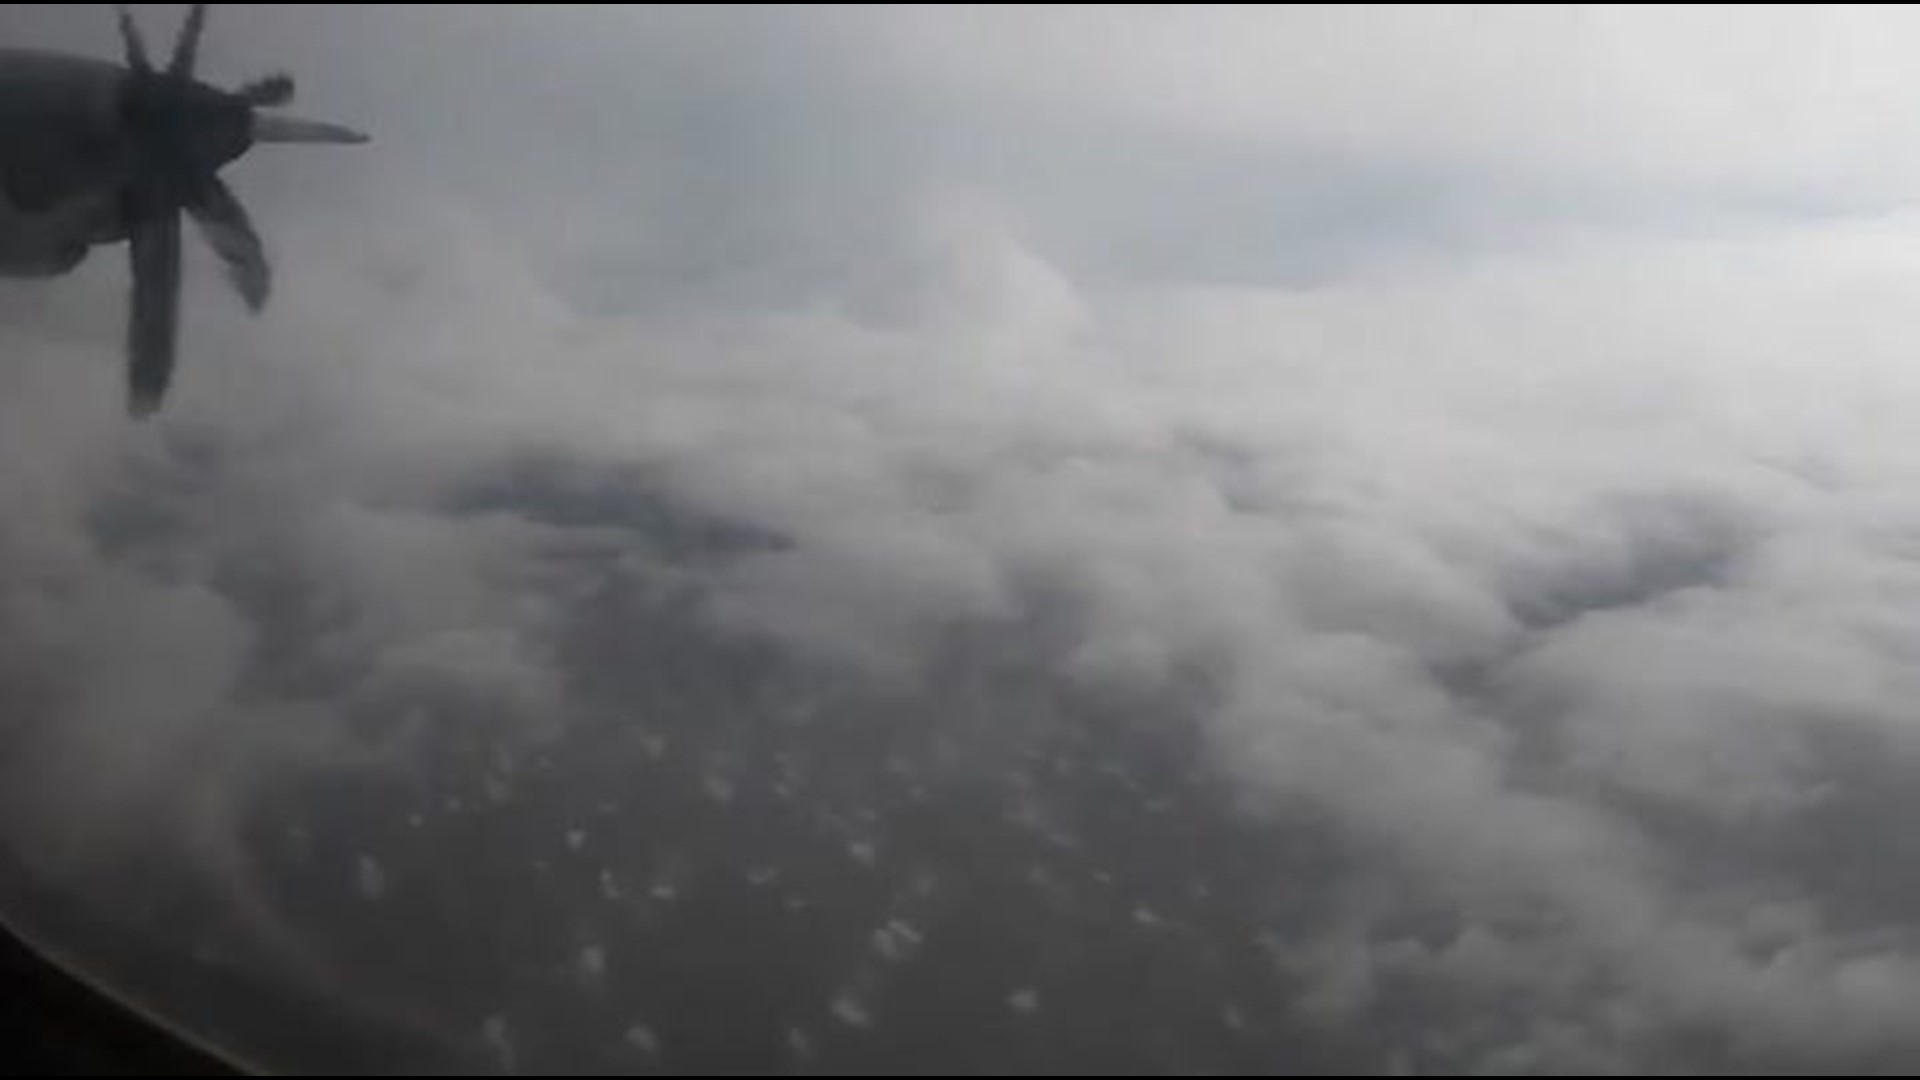 The Hurricane Hunters flew through Zeta, on Oct. 29, to get an inside look of the storm.